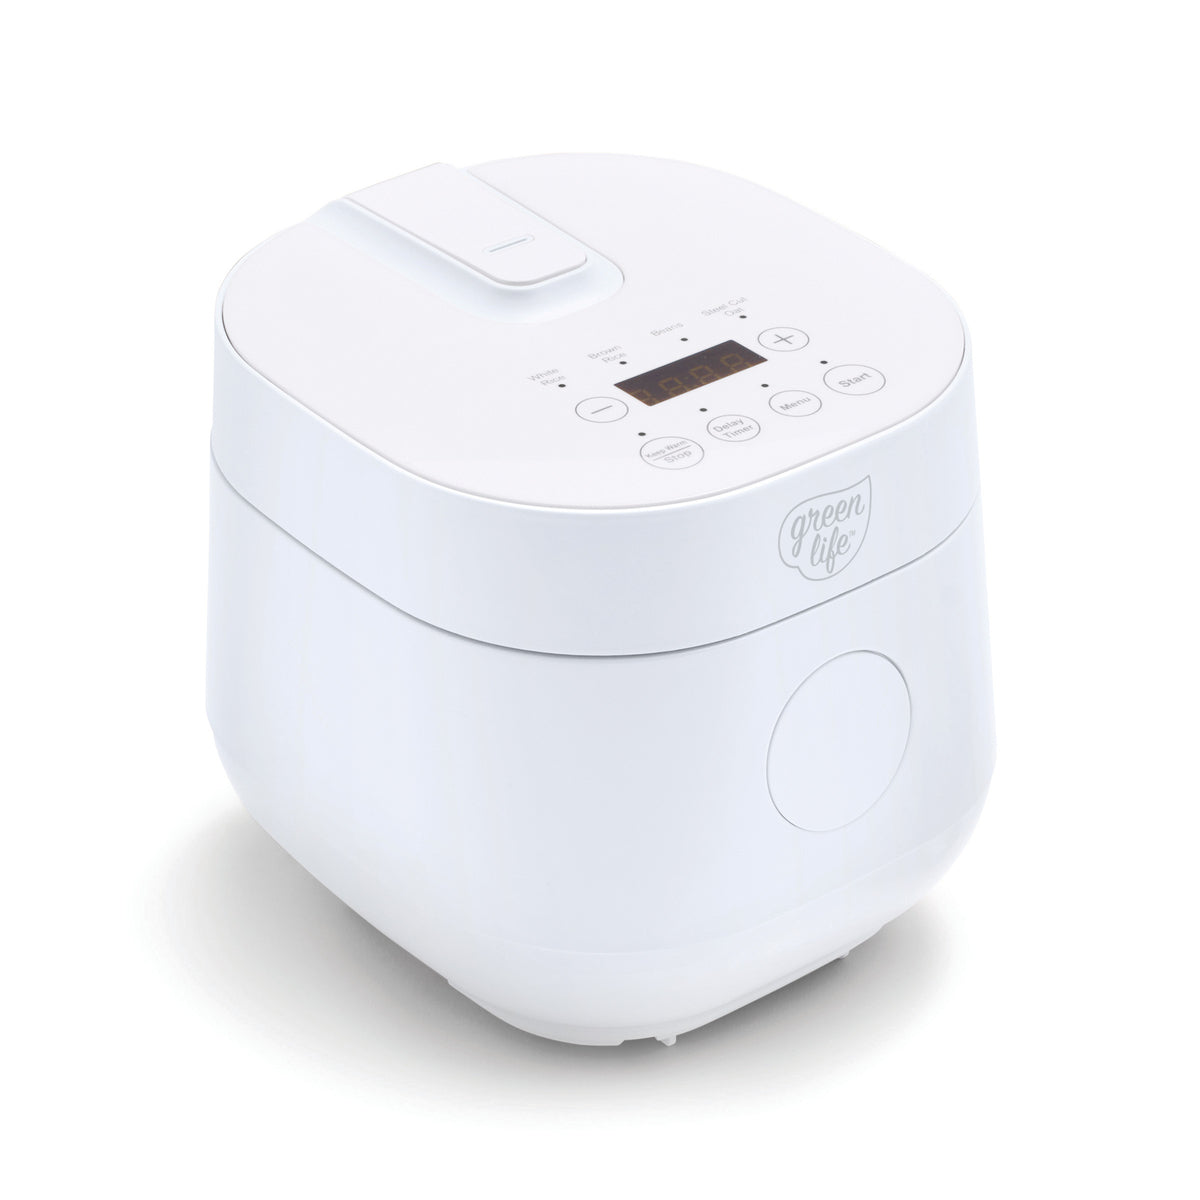 GreenLife Electrics Rice Cooker & Reviews